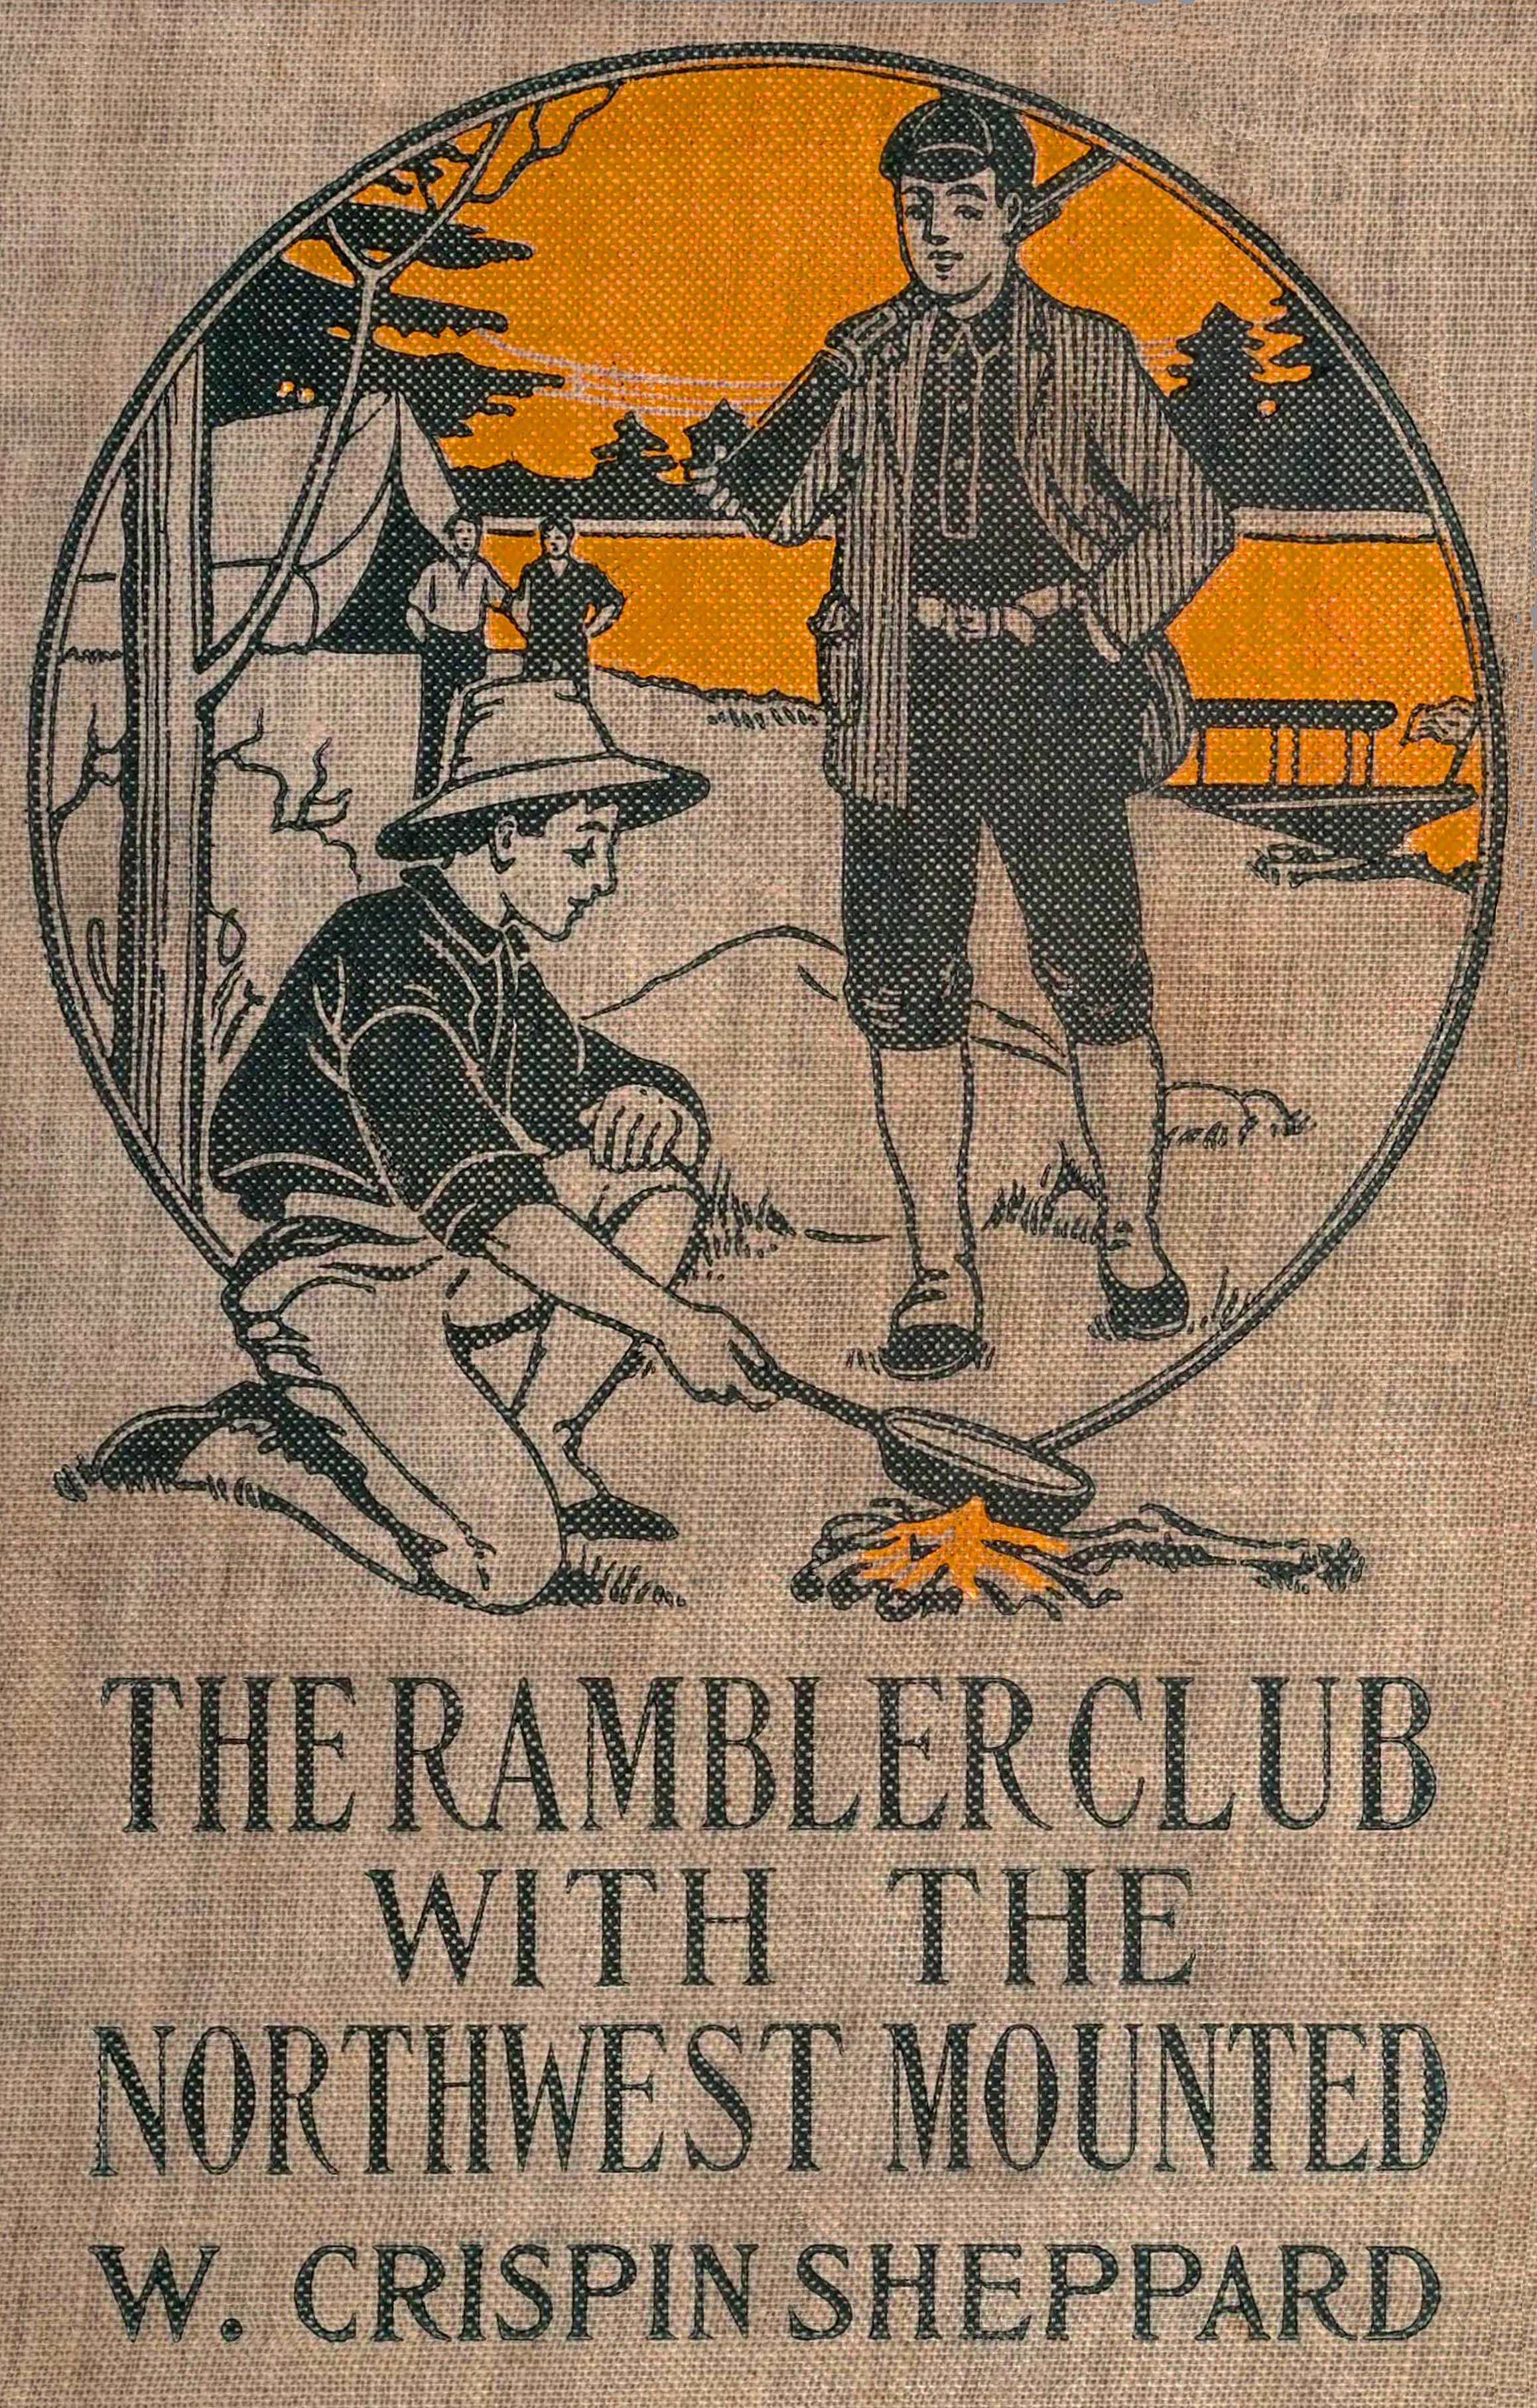 The Rambler Club with the Northwest Mounted